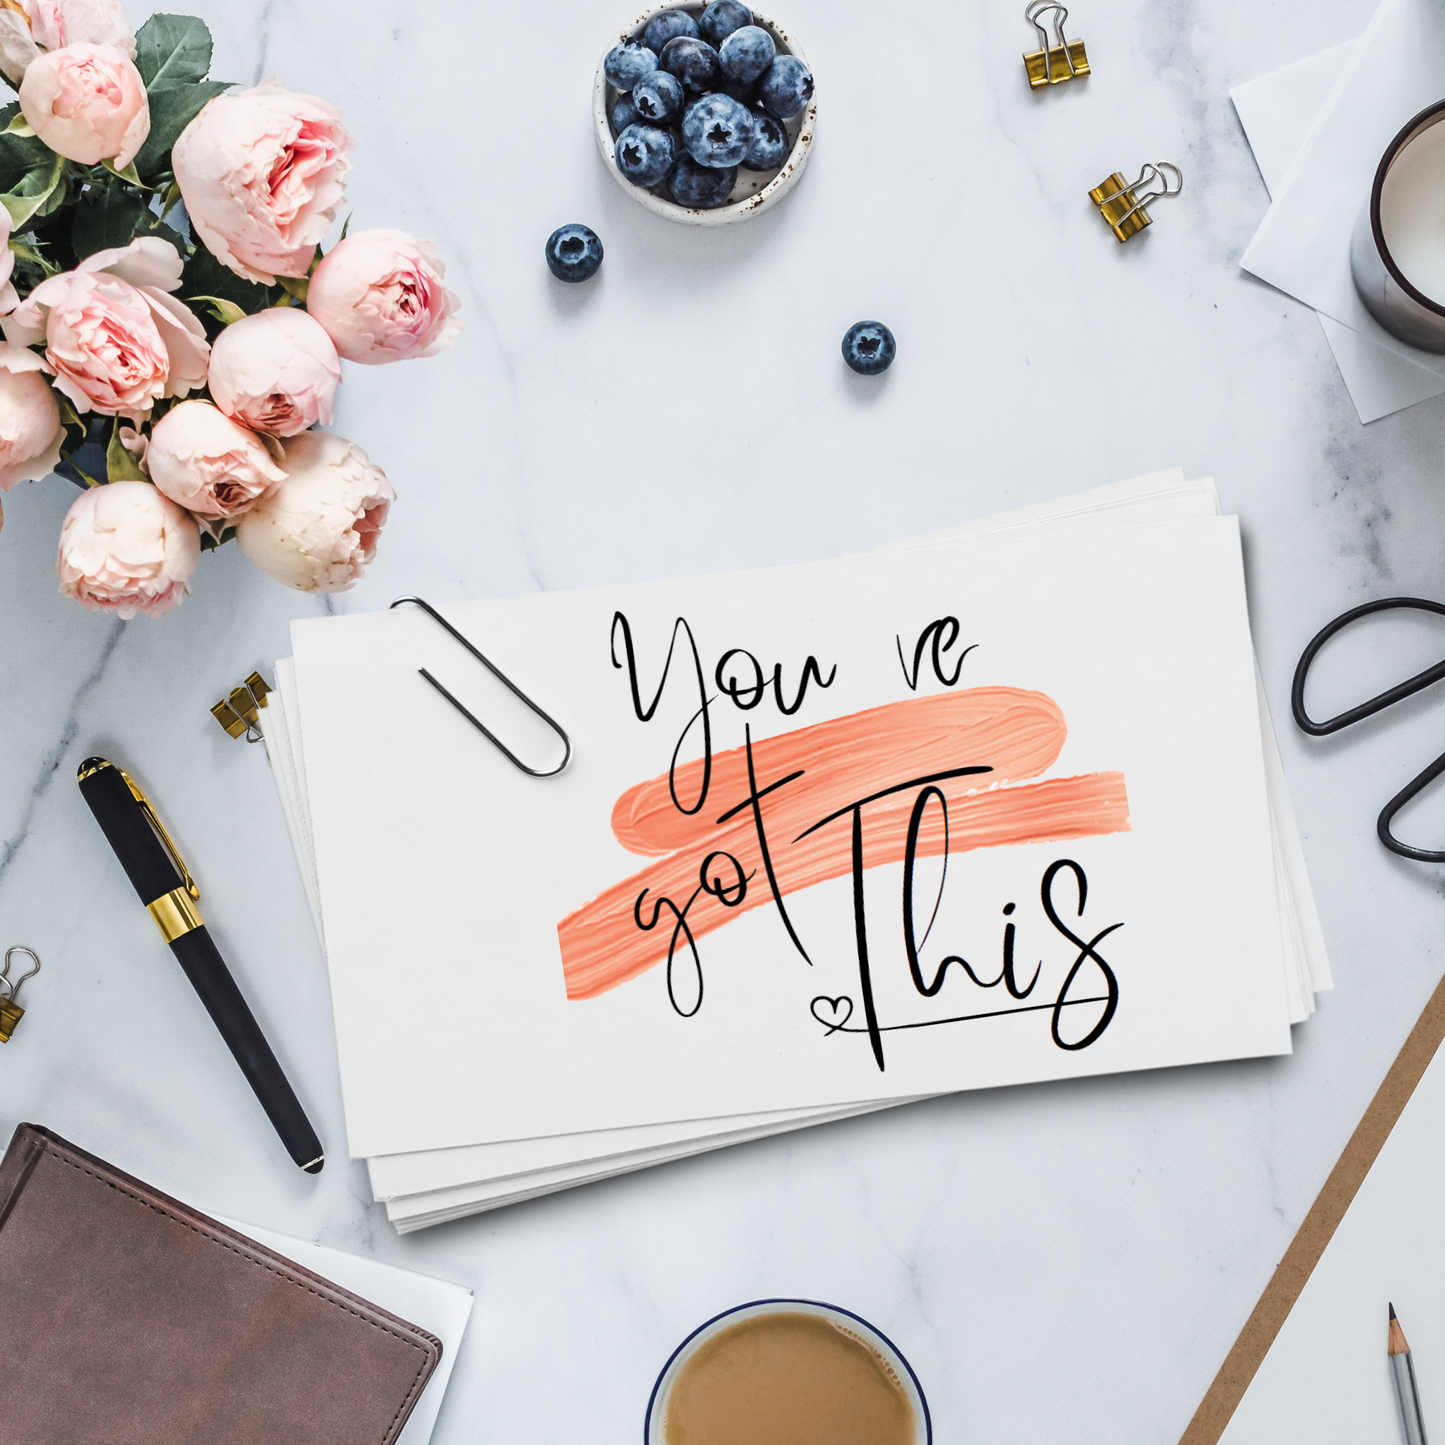 Energizing Self Care Affirmations You've Got This